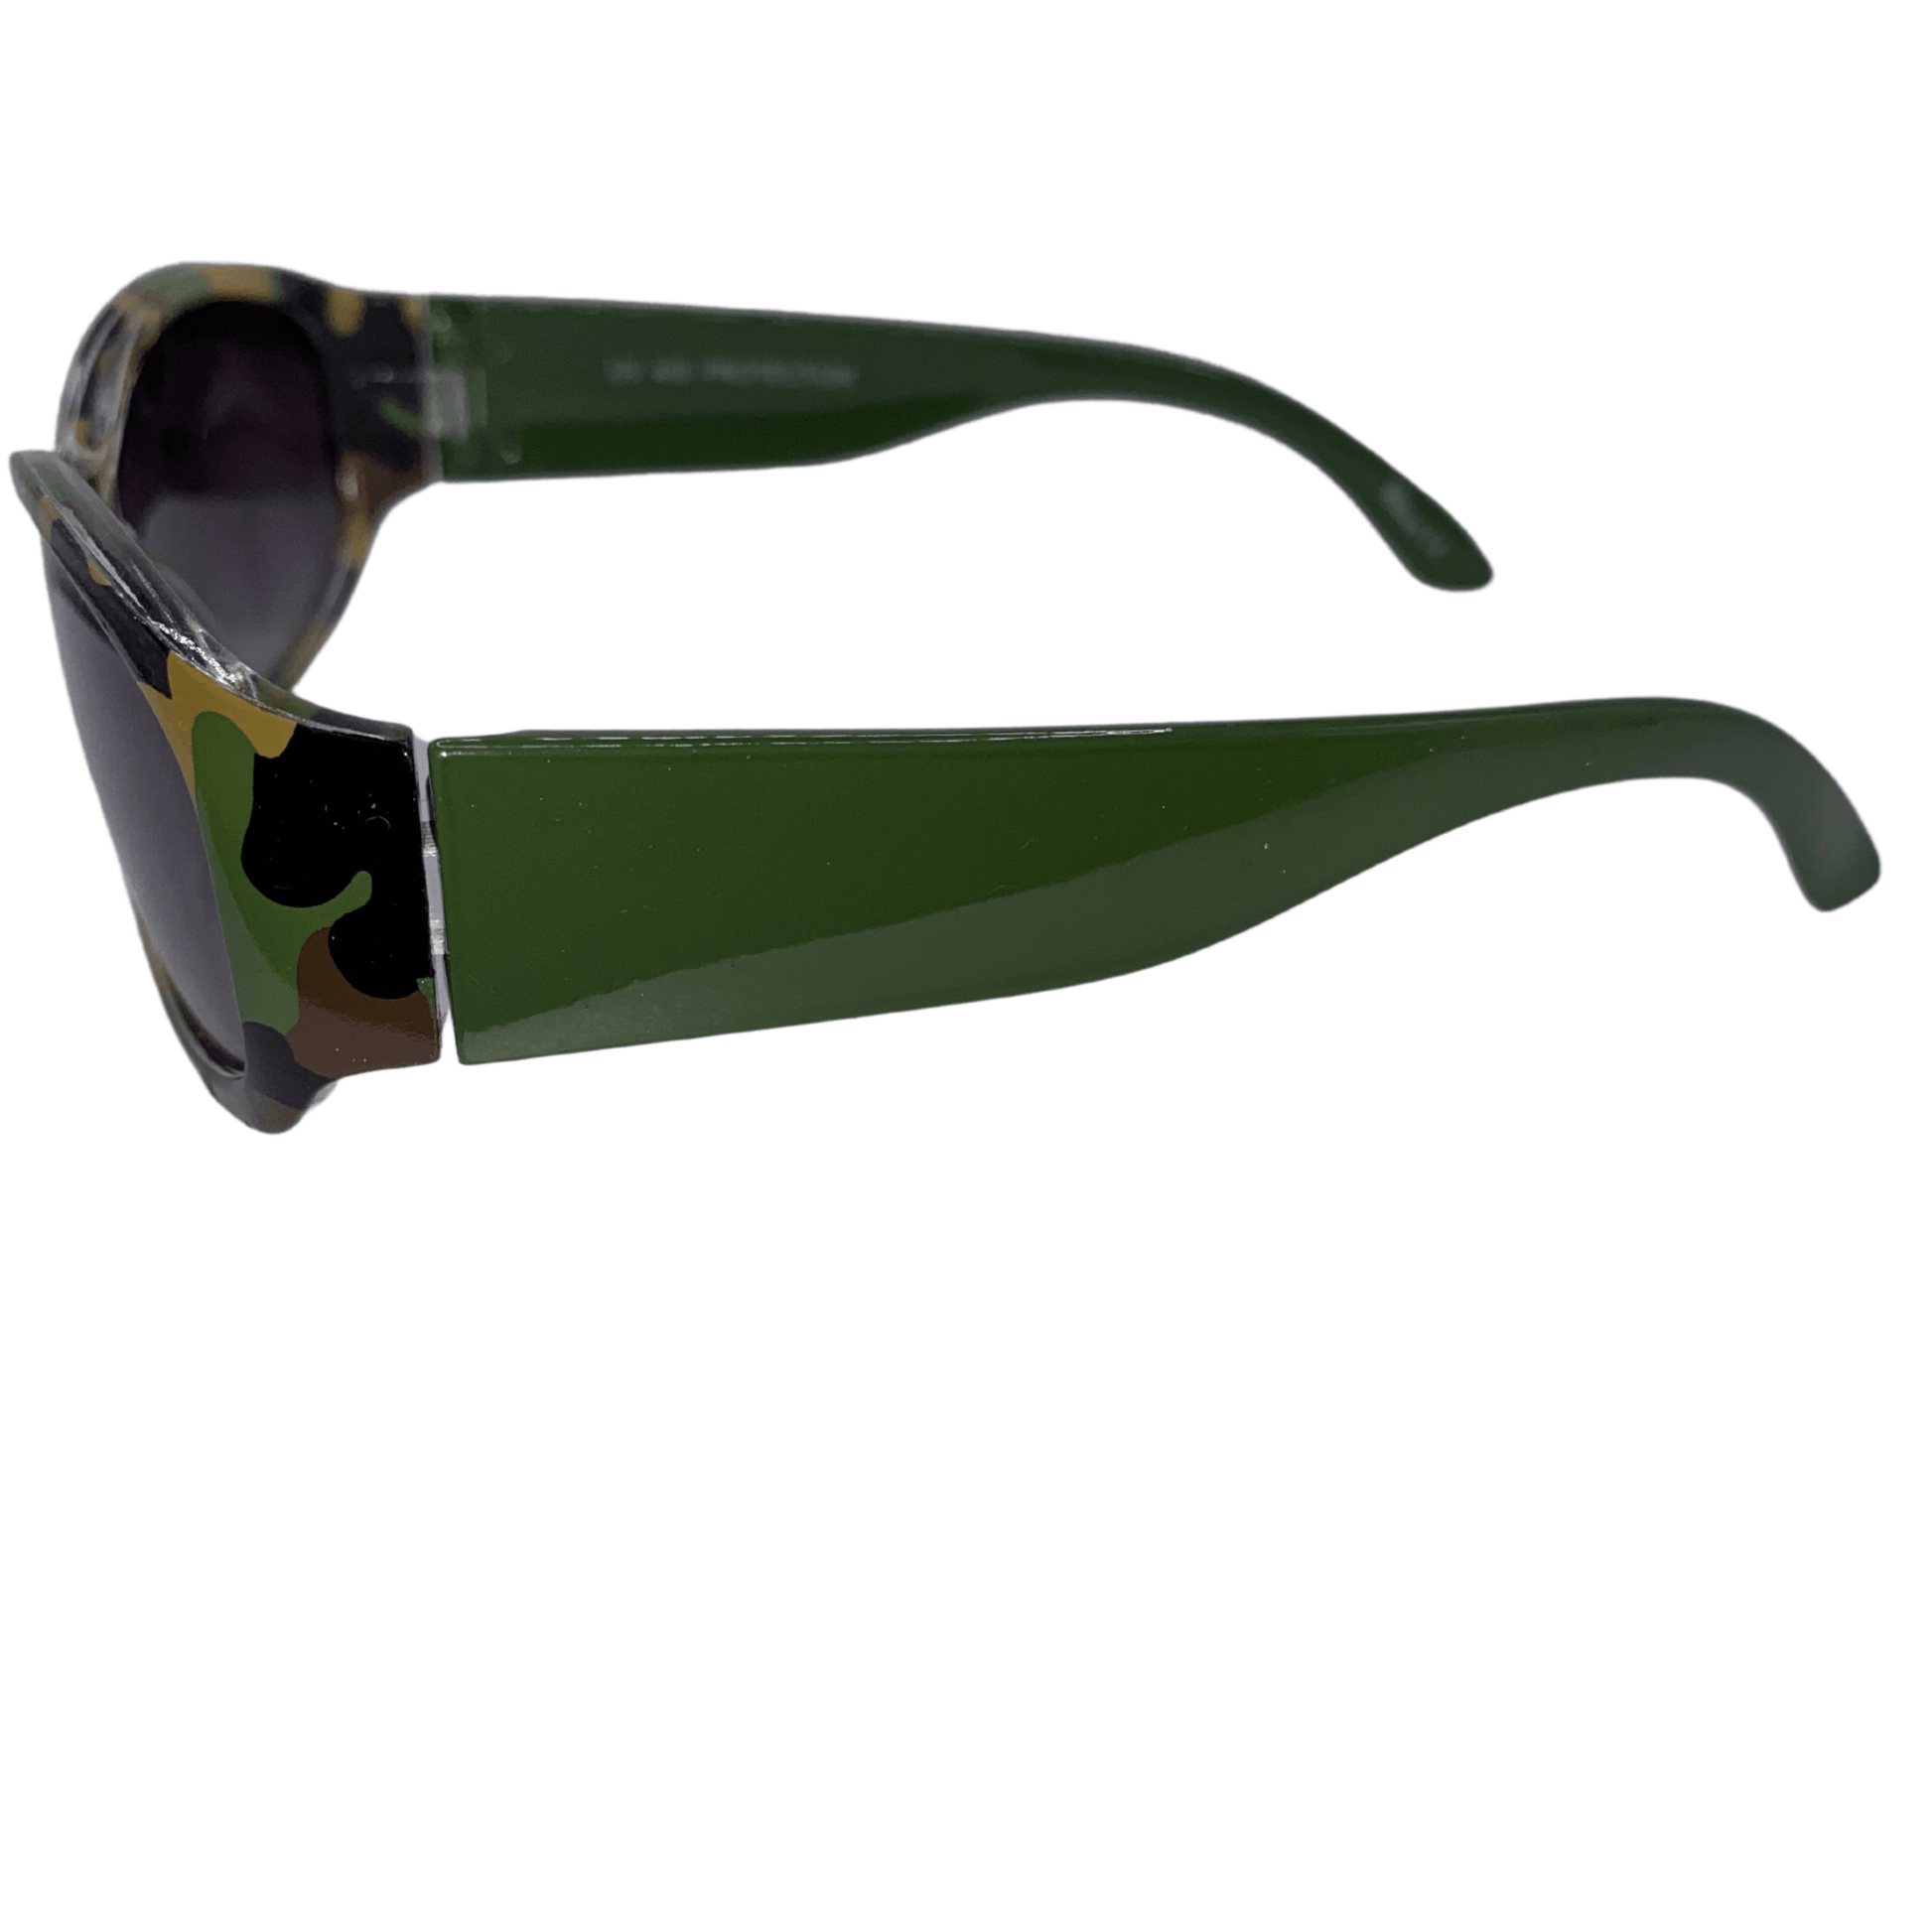 Be ready to block the sun with these green camouflage sunglasses with green arms.